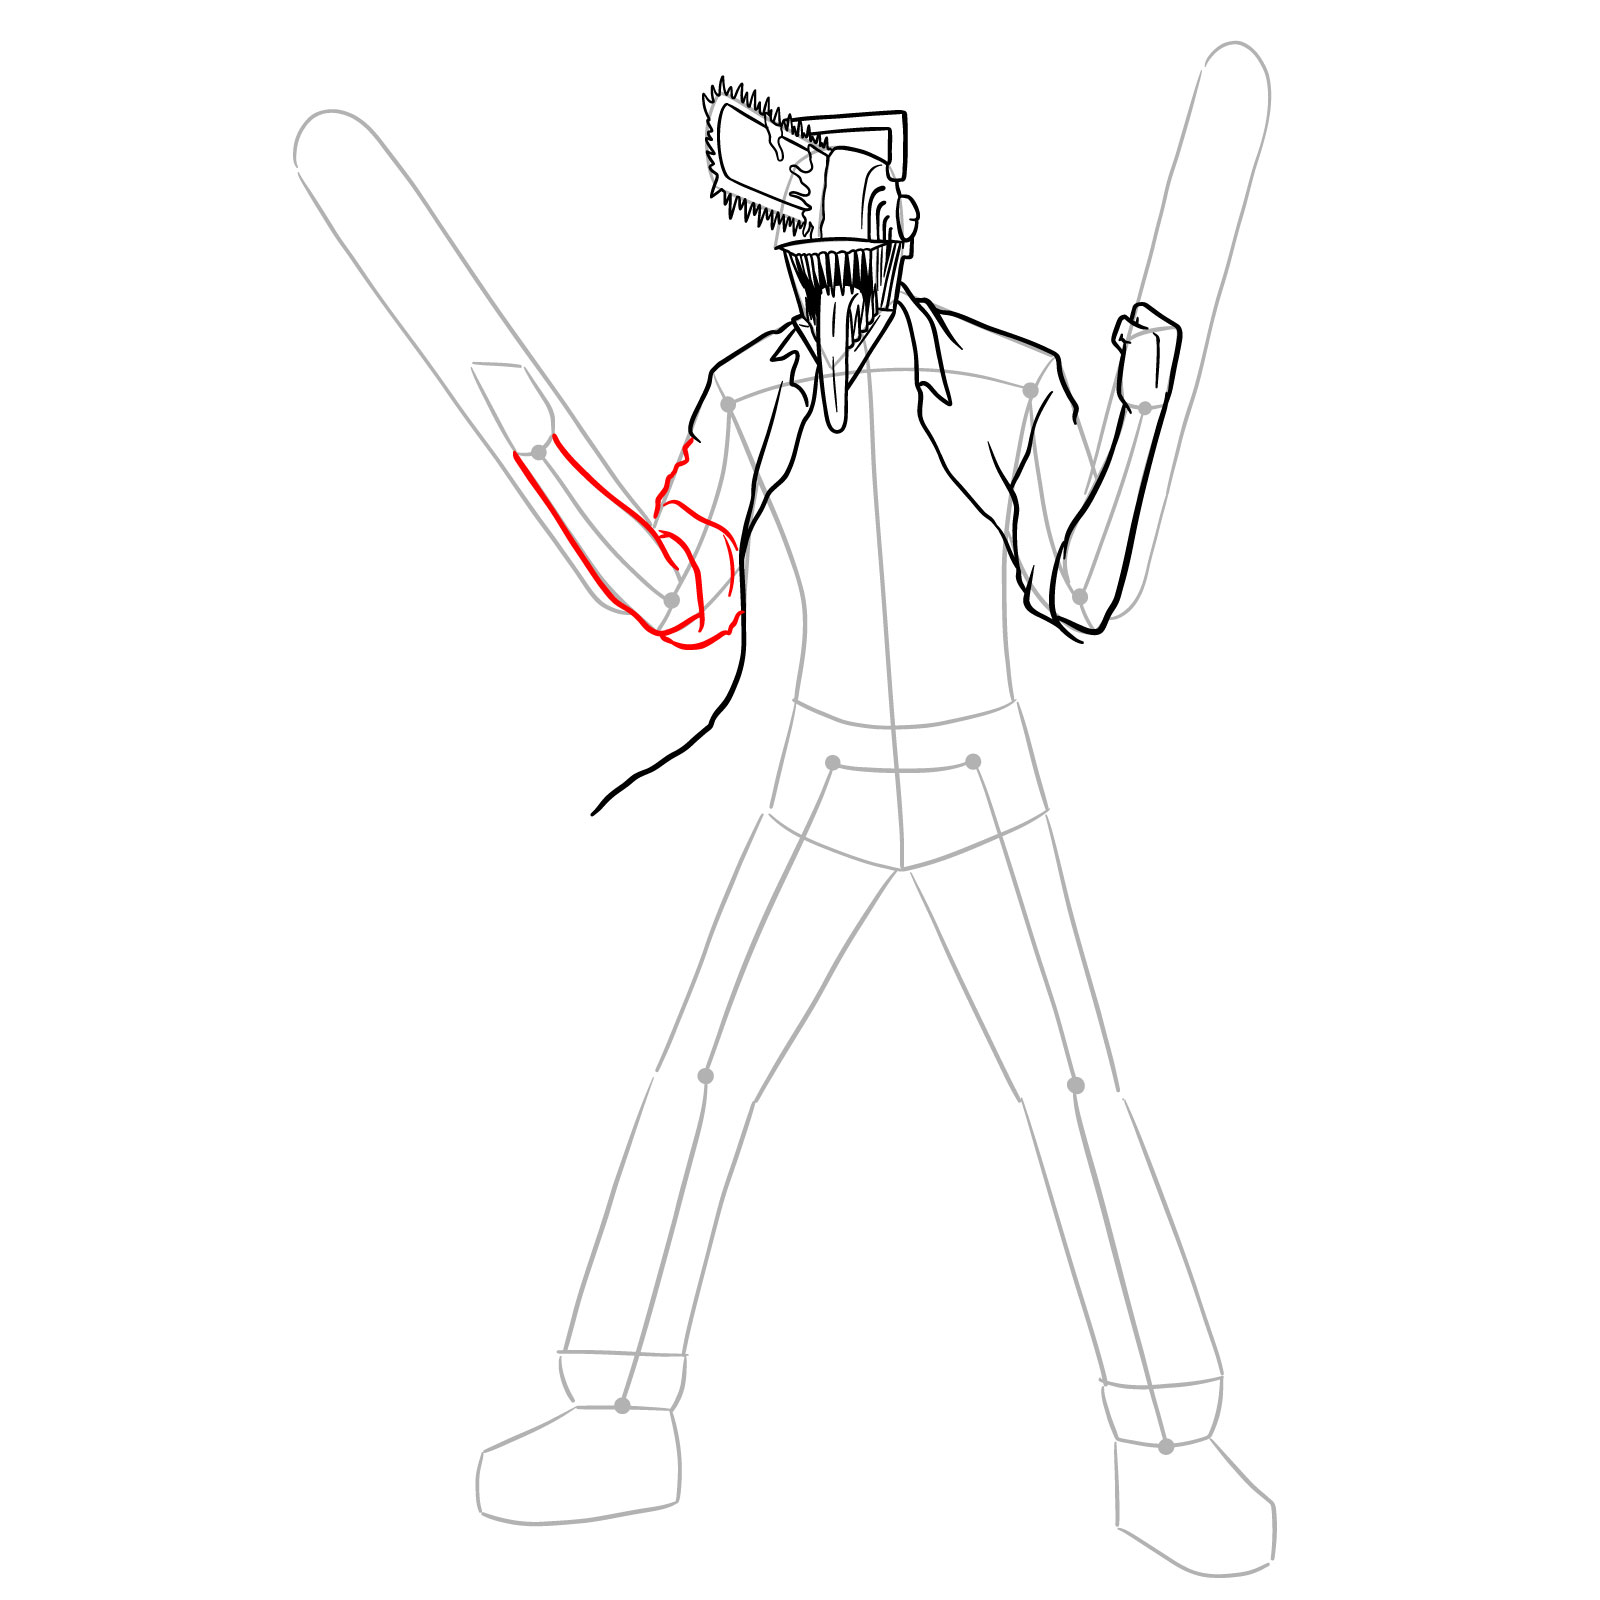 Sketching the right sleeve and arm of Chainsaw Man in a dynamic pose - step 17